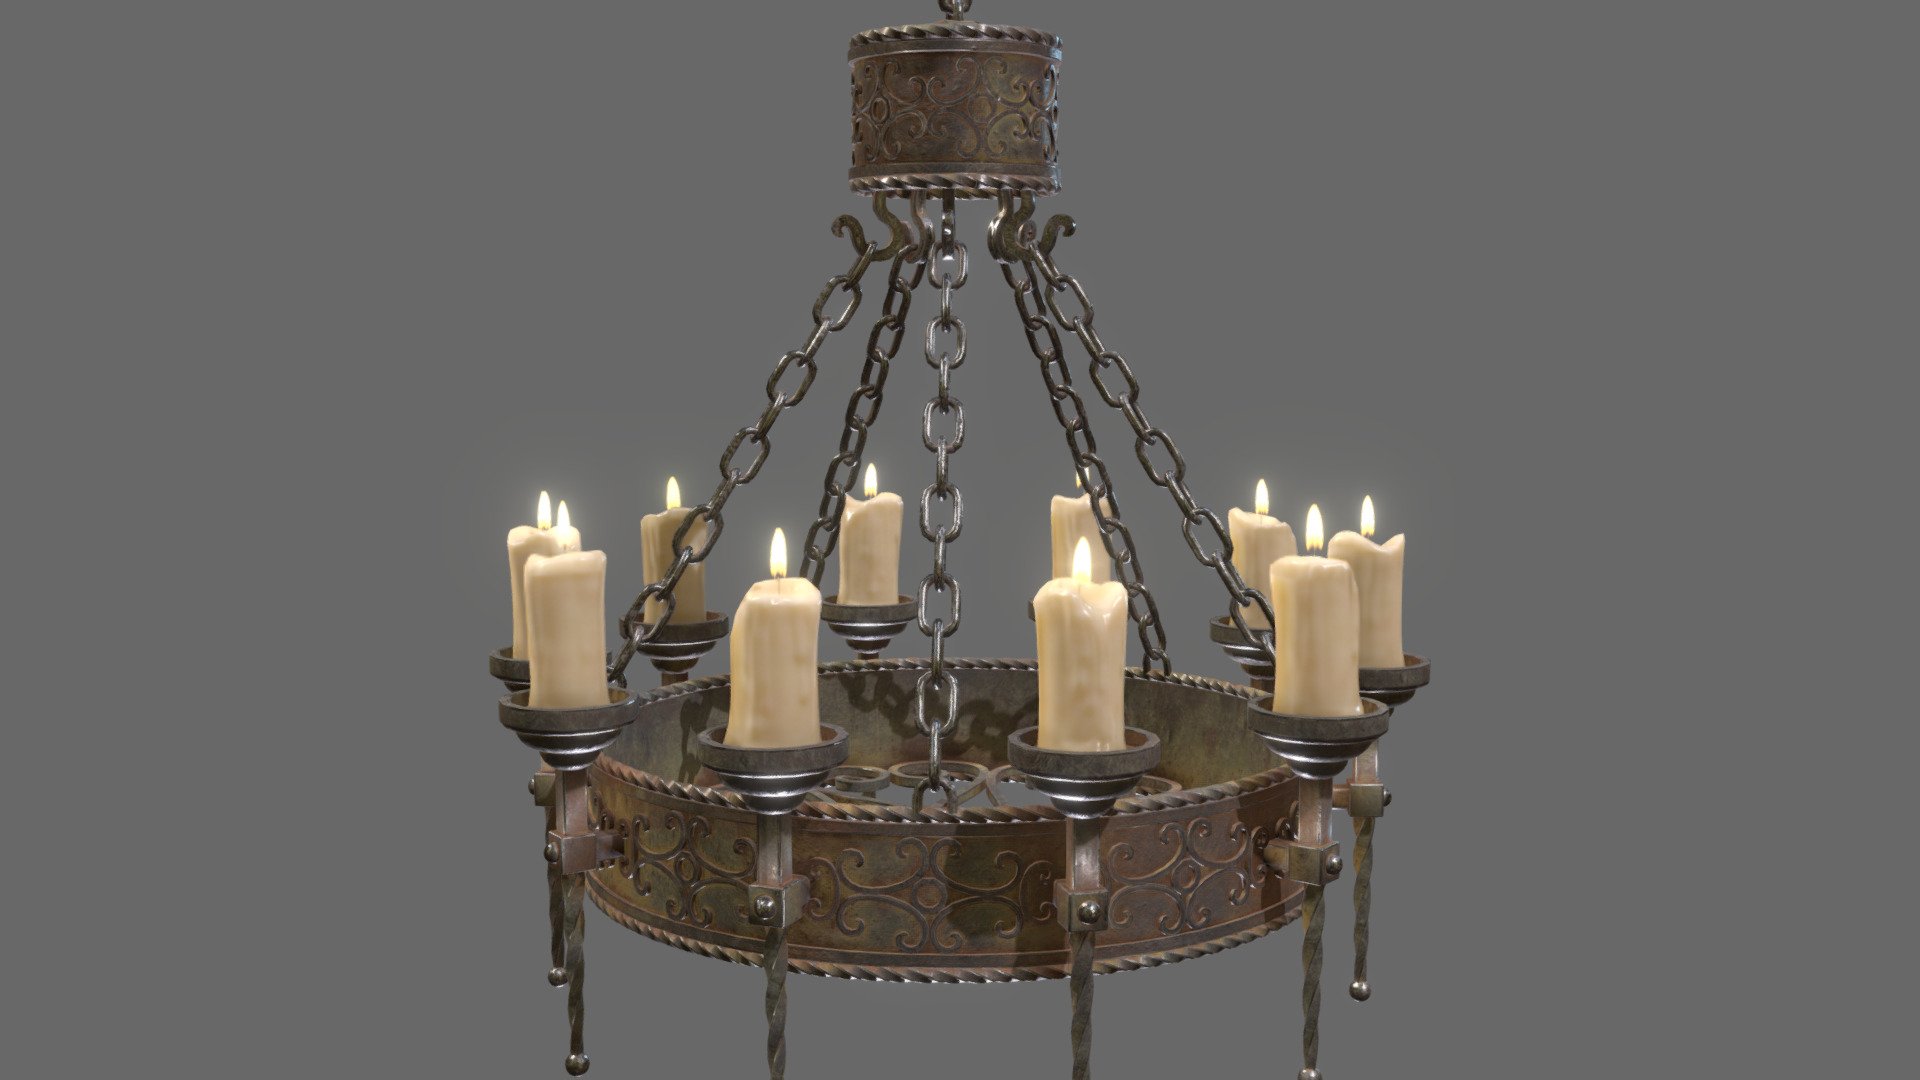 Candle Chandelier B

A medieval chandelier of candles with a rusty iron material. Very good for close ups. It is game ready with a lot of modeling details.

UV MAPS

It is all non overlaping. There are 4 diferent UV Maps.




2 for the chandelier (I made it this way, so the details of the textures look really good at closeups)

1 for the candles

1 for the flames

MATERIALS

There are 4 diferent material associate with each part of the object: 
* 2 for the chandelier's iron
* 1 for the candles
* 1 for the flames. 

In the .blend files the material are all ready for use, with proper sub surface scattering for the lights and emission for the flames.

TEXTURES:




There are 2 main textures for the chandelier in 4K resolution

The clandle texture is in 2k resolution.

The flame texture is in 256 x 512 pixels resolution
 - Candle Chandelier B - Buy Royalty Free 3D model by pixeldigitalarts by Giovanni Lucca (@pixeldigitalarts) 3d model